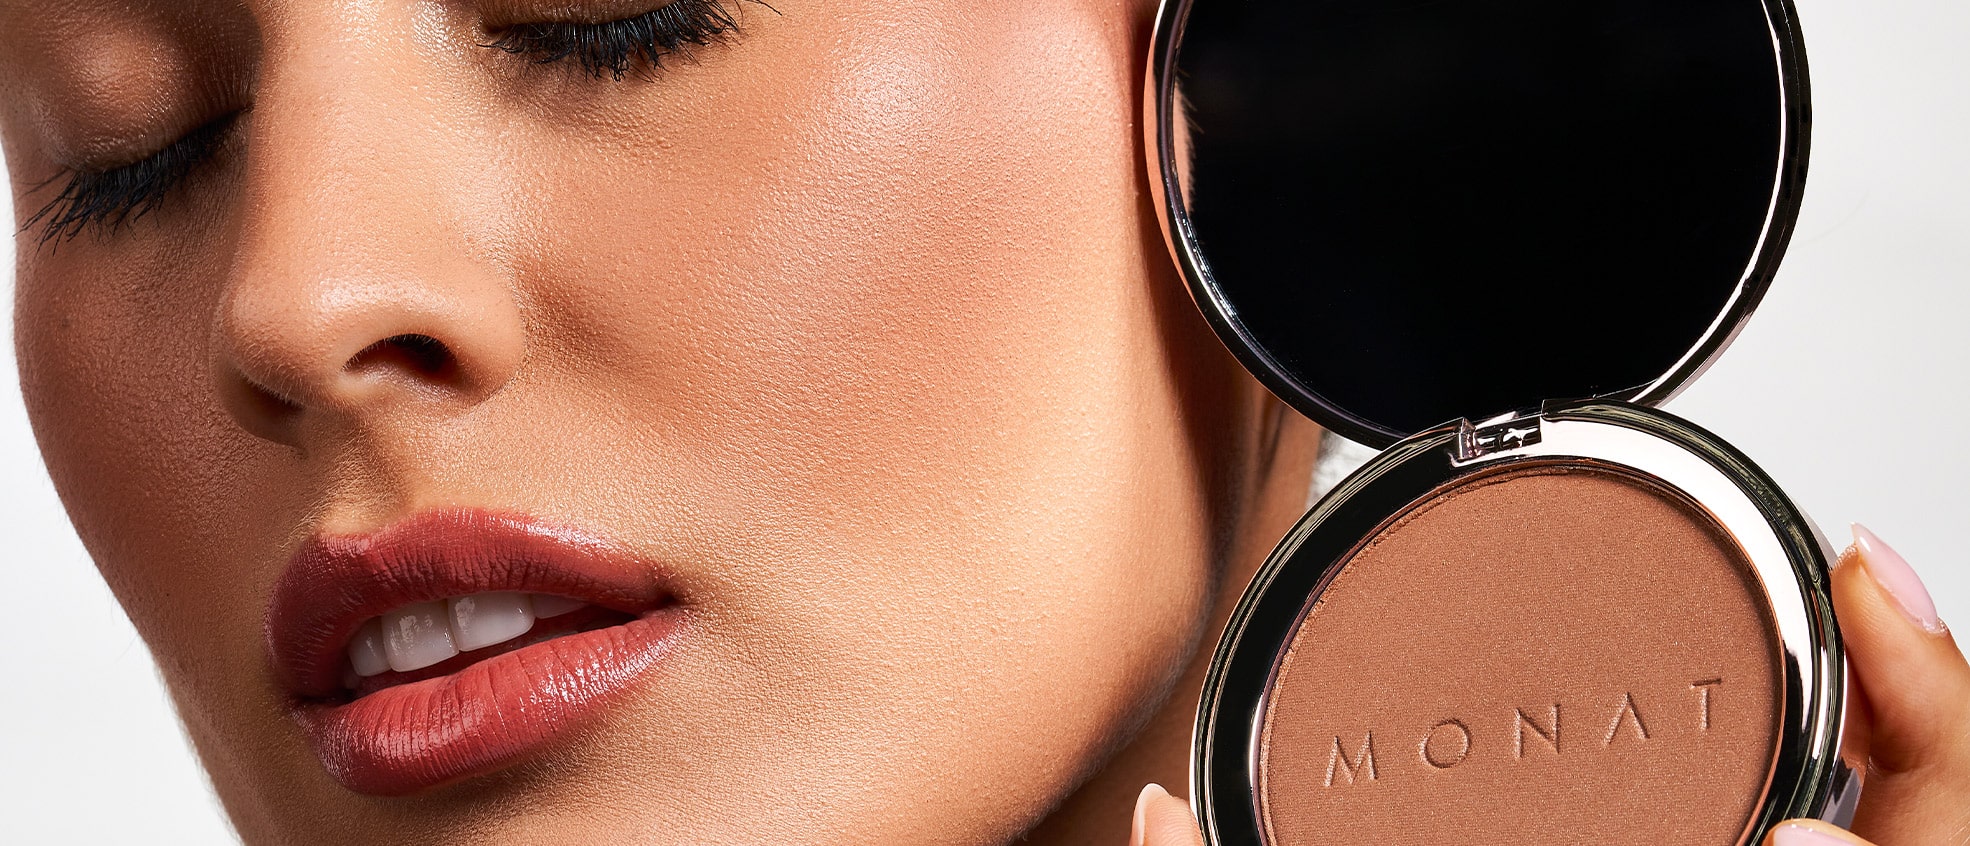 Female holding the MONAT Radiant Bronzer™ next to her face.